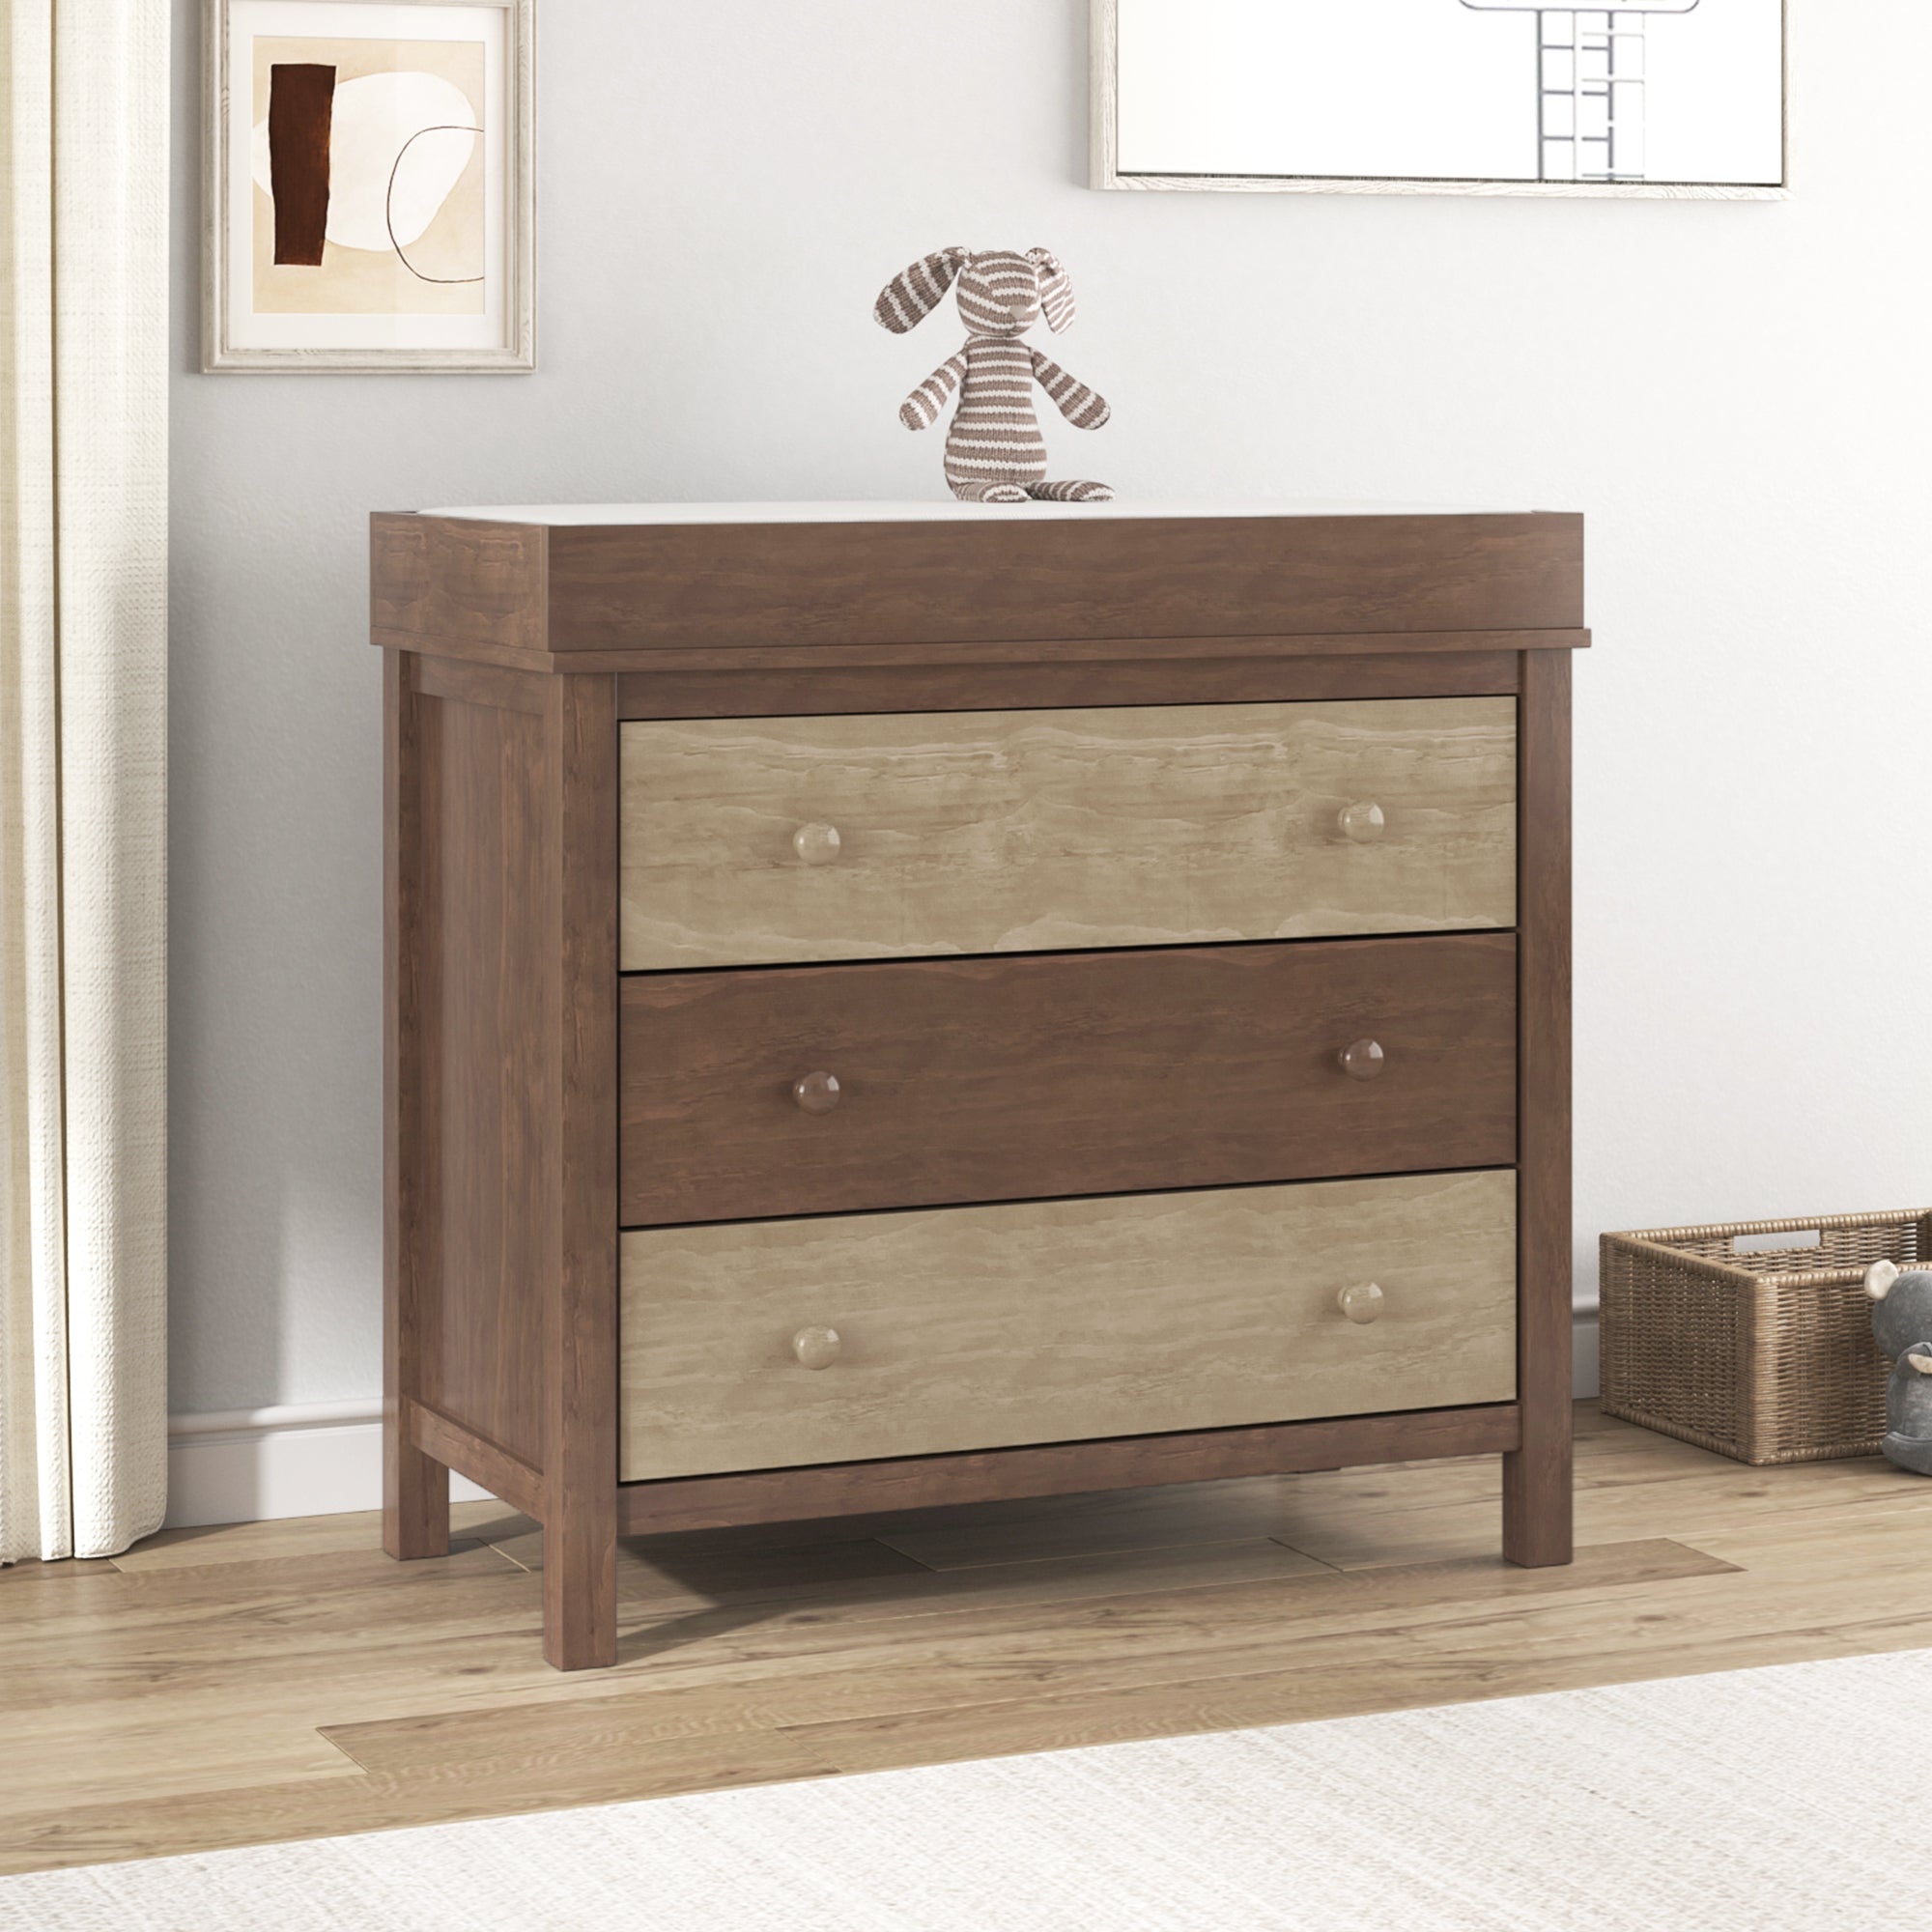 3 Drawer Changer Dresser with Removable Changing Tray brown-solid wood+mdf